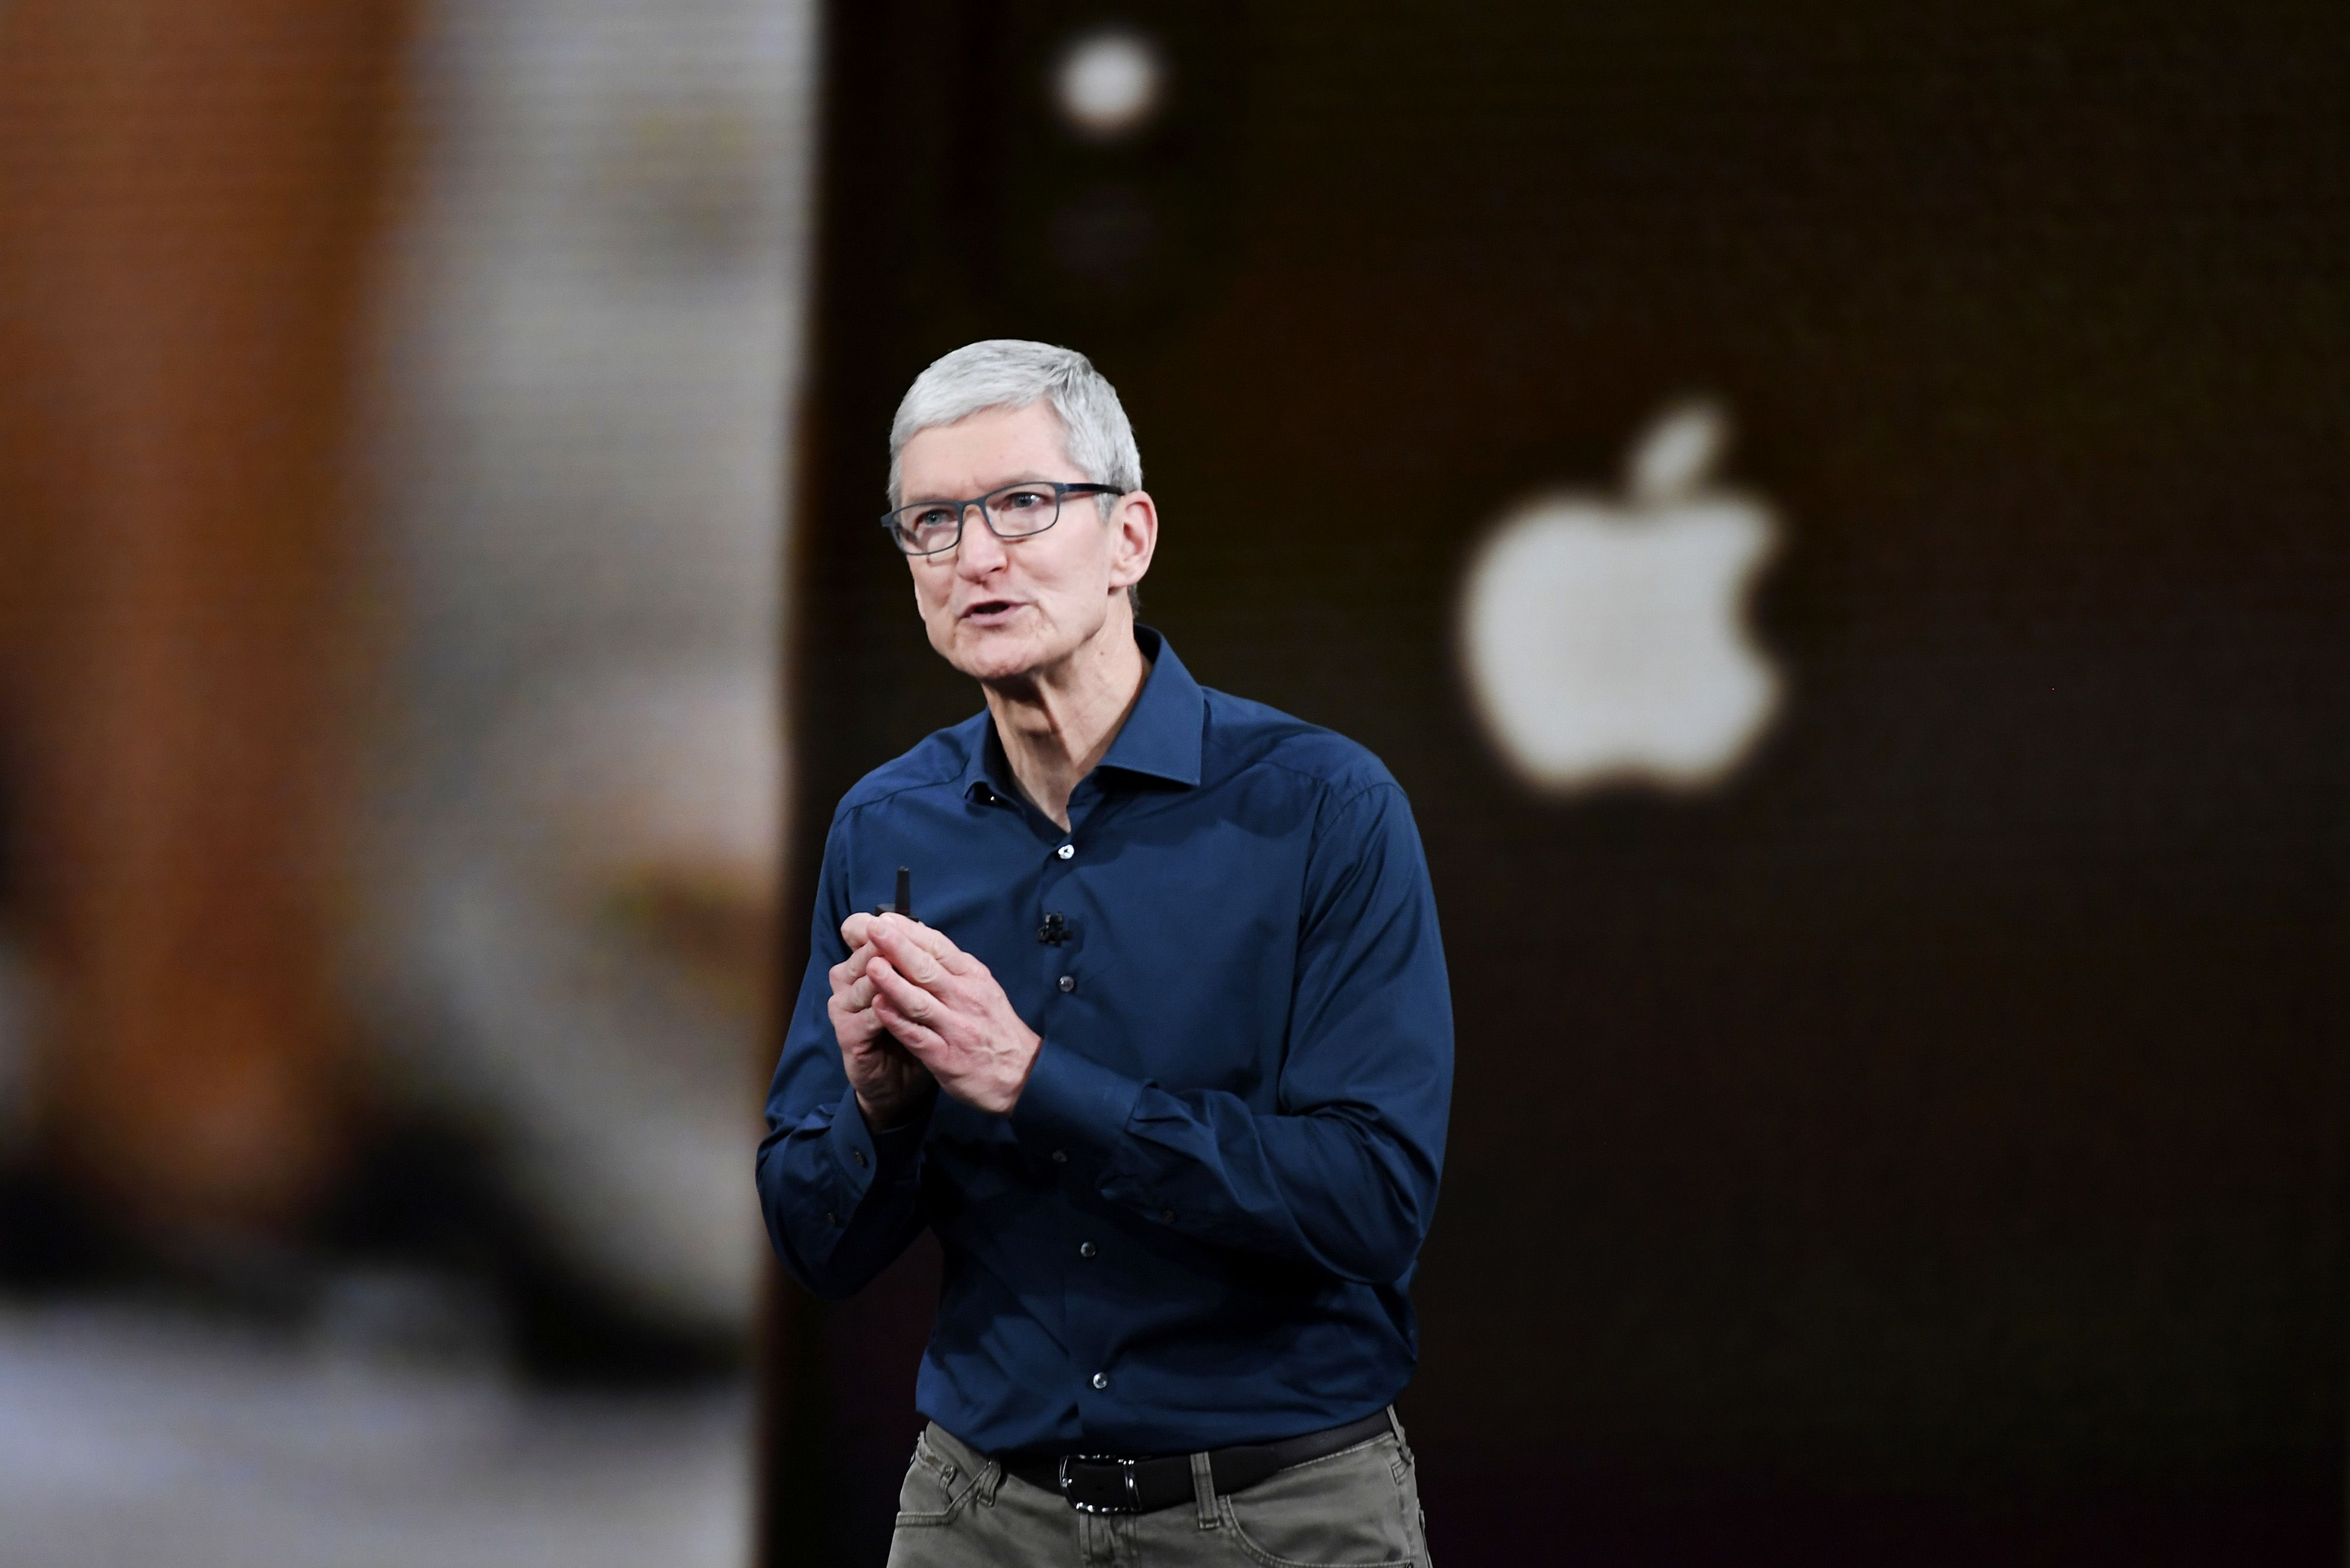 Apple CEO Tim Cook Stanford commencement speech